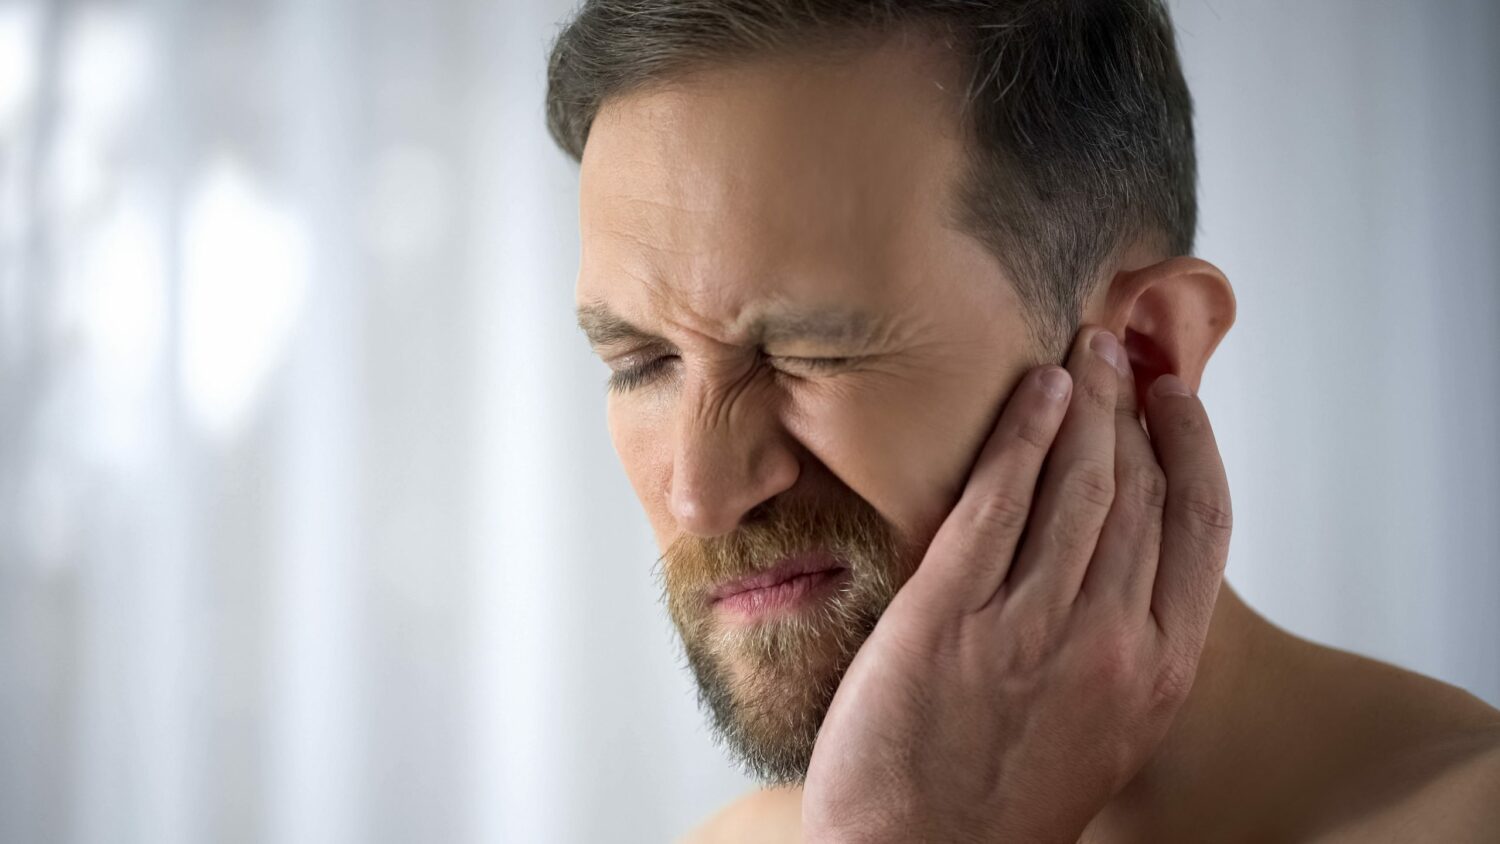 Is Ringing in Your Ears Caused by Anxiety?